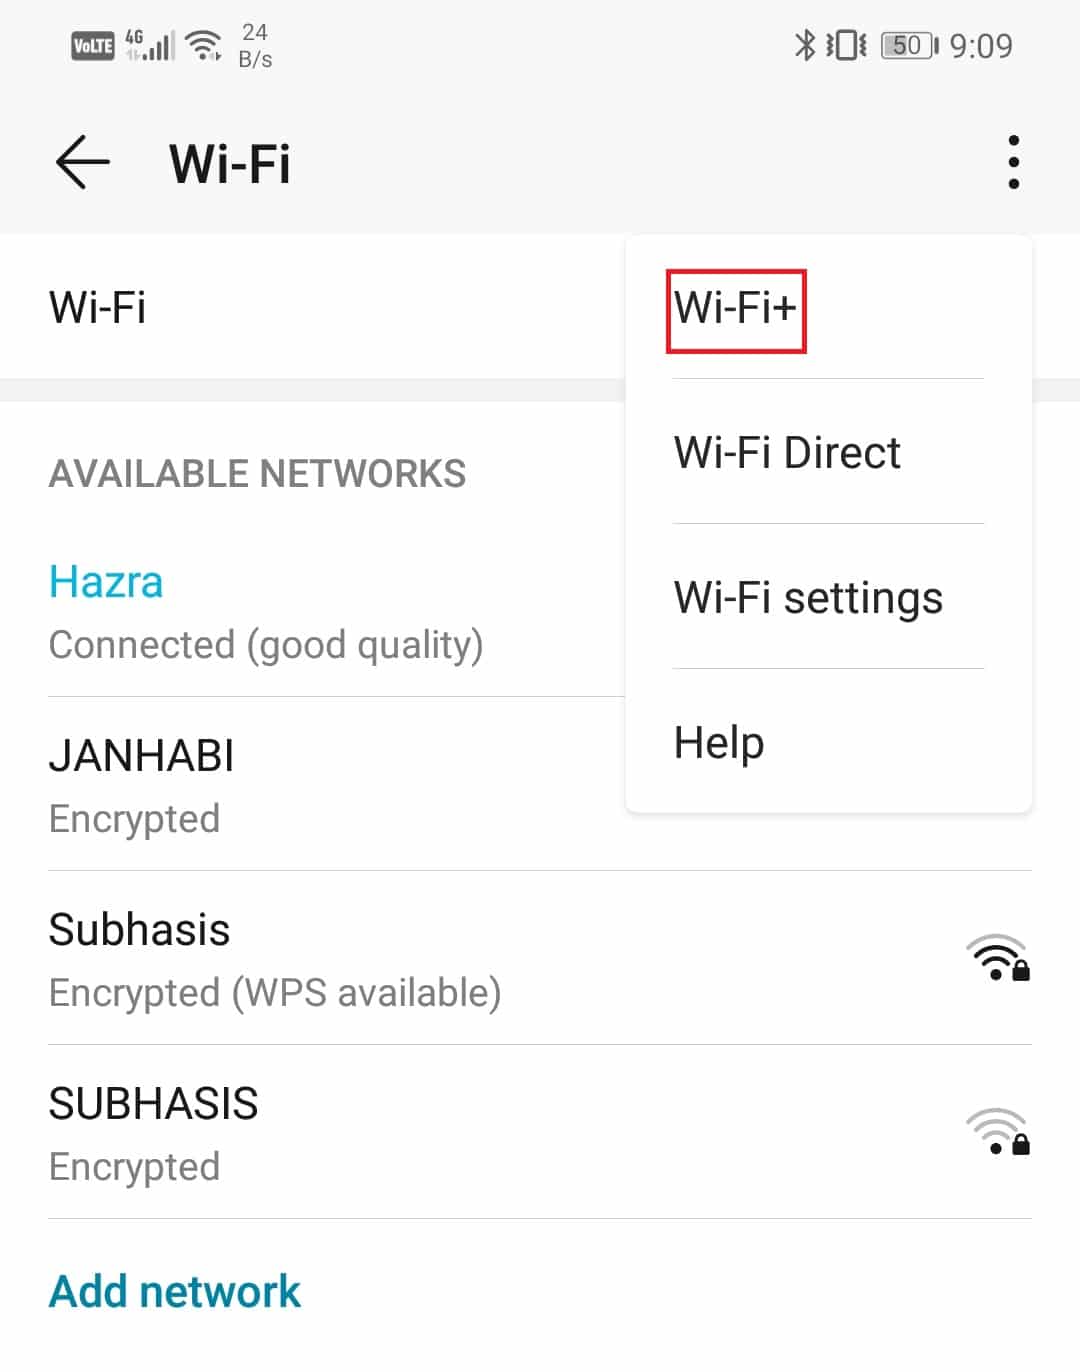 tap on the three-dot menu on the top-right corner and select the Wi-Fi+ option.